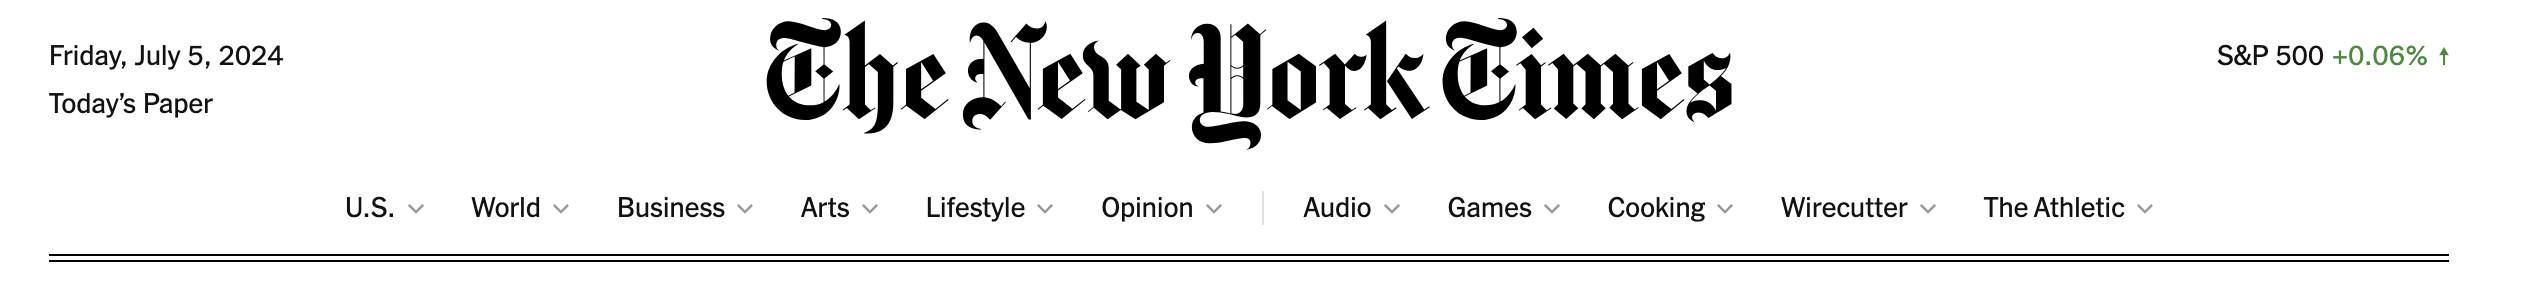 The New York Times website with navigation items U.S., World, Business, Arts, Lifestyle, Opinion, Audio, Games, Cooking, Wirecutter, The Athletic